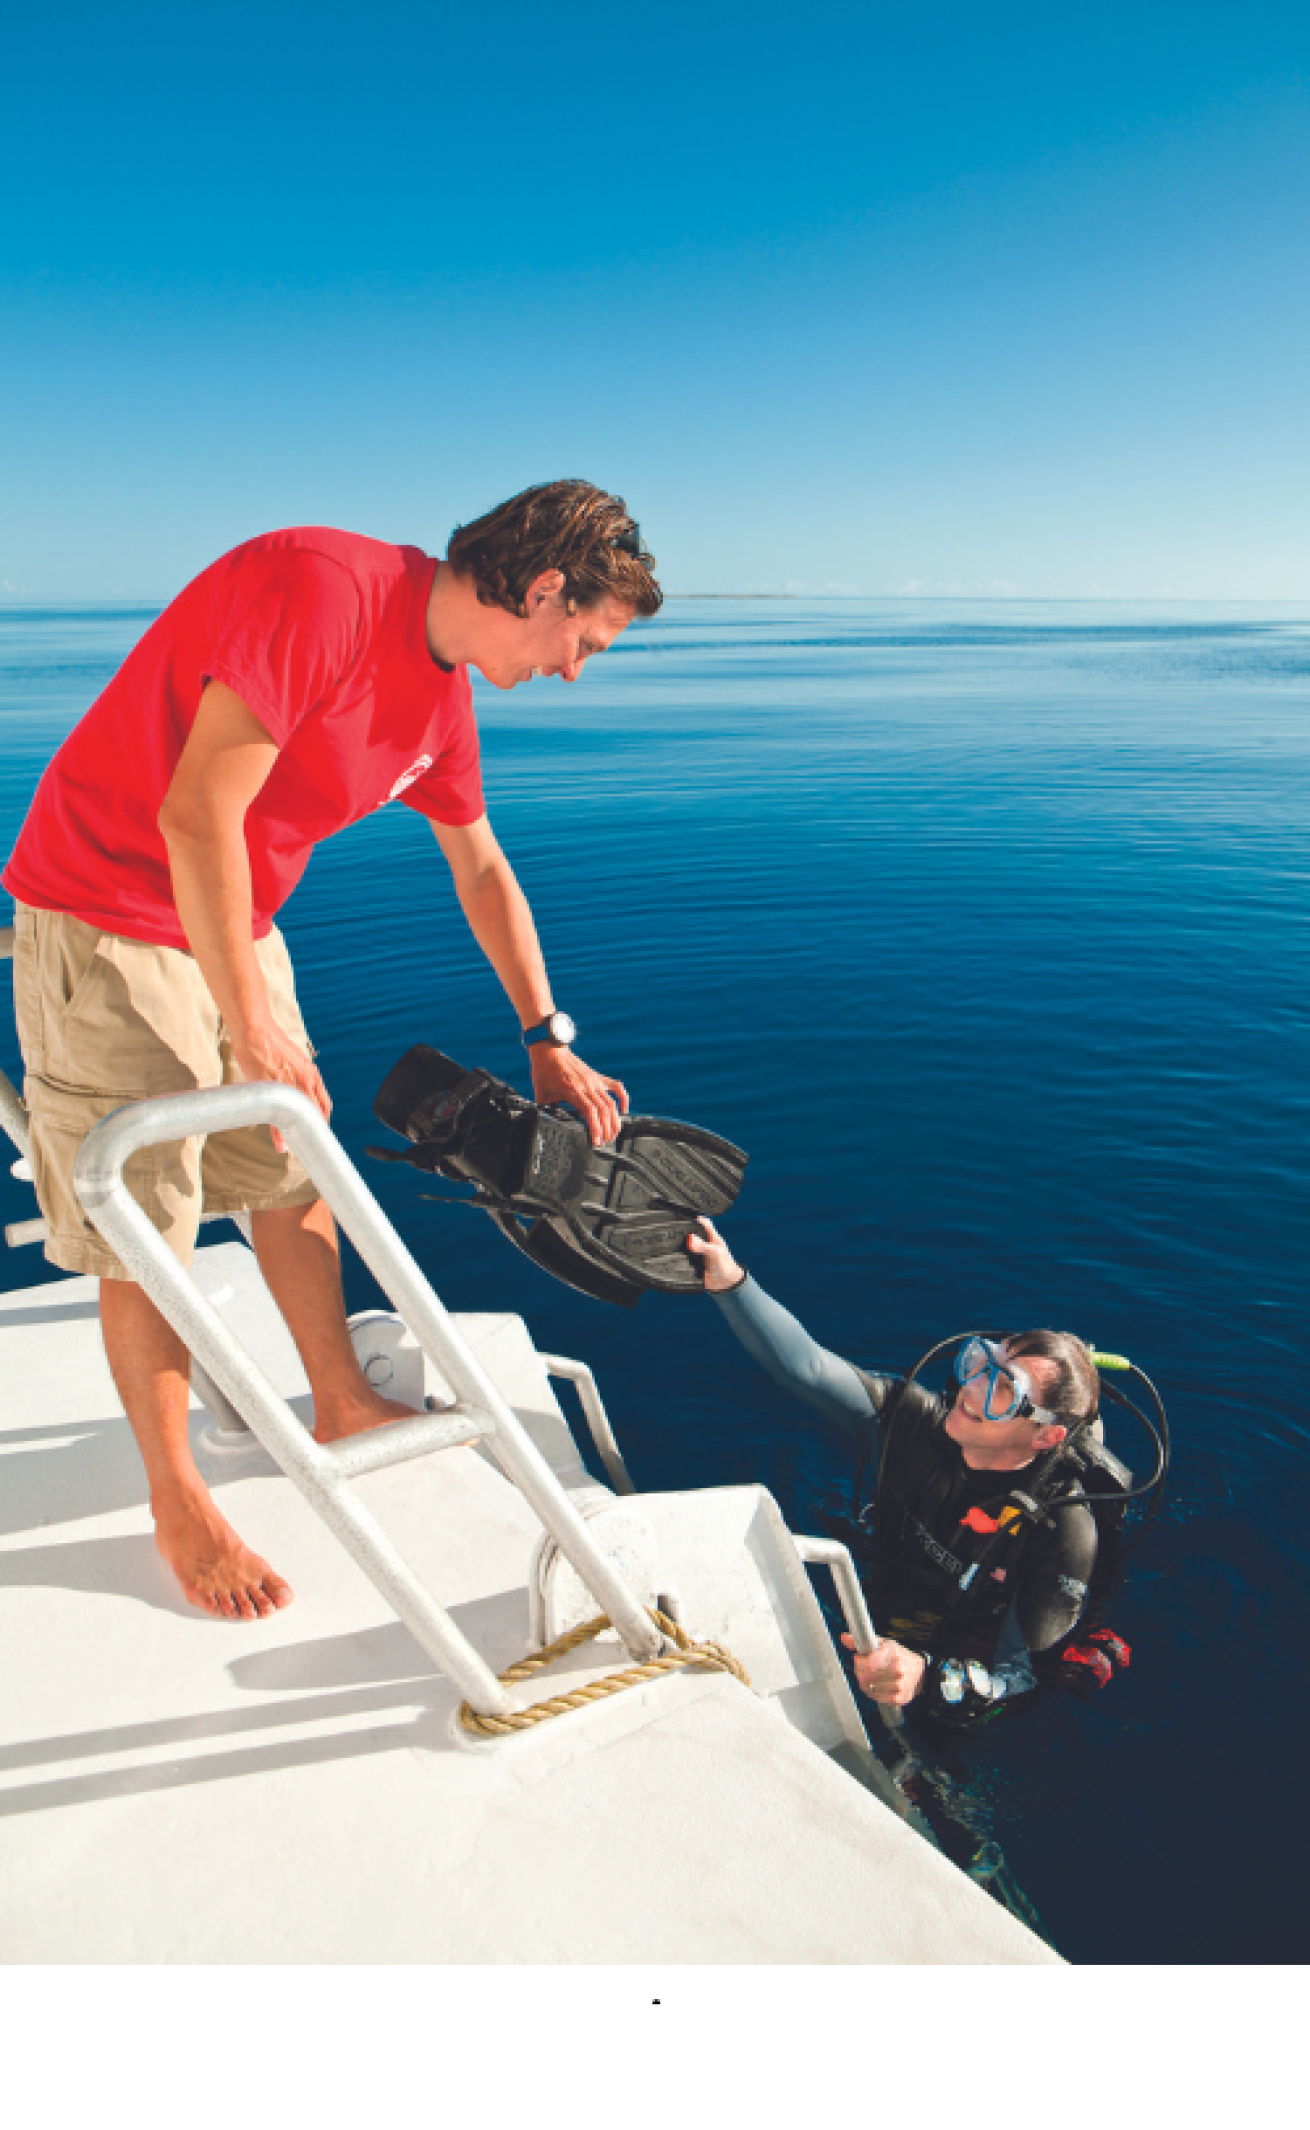 A person holding a scuba mask to another person on a boat